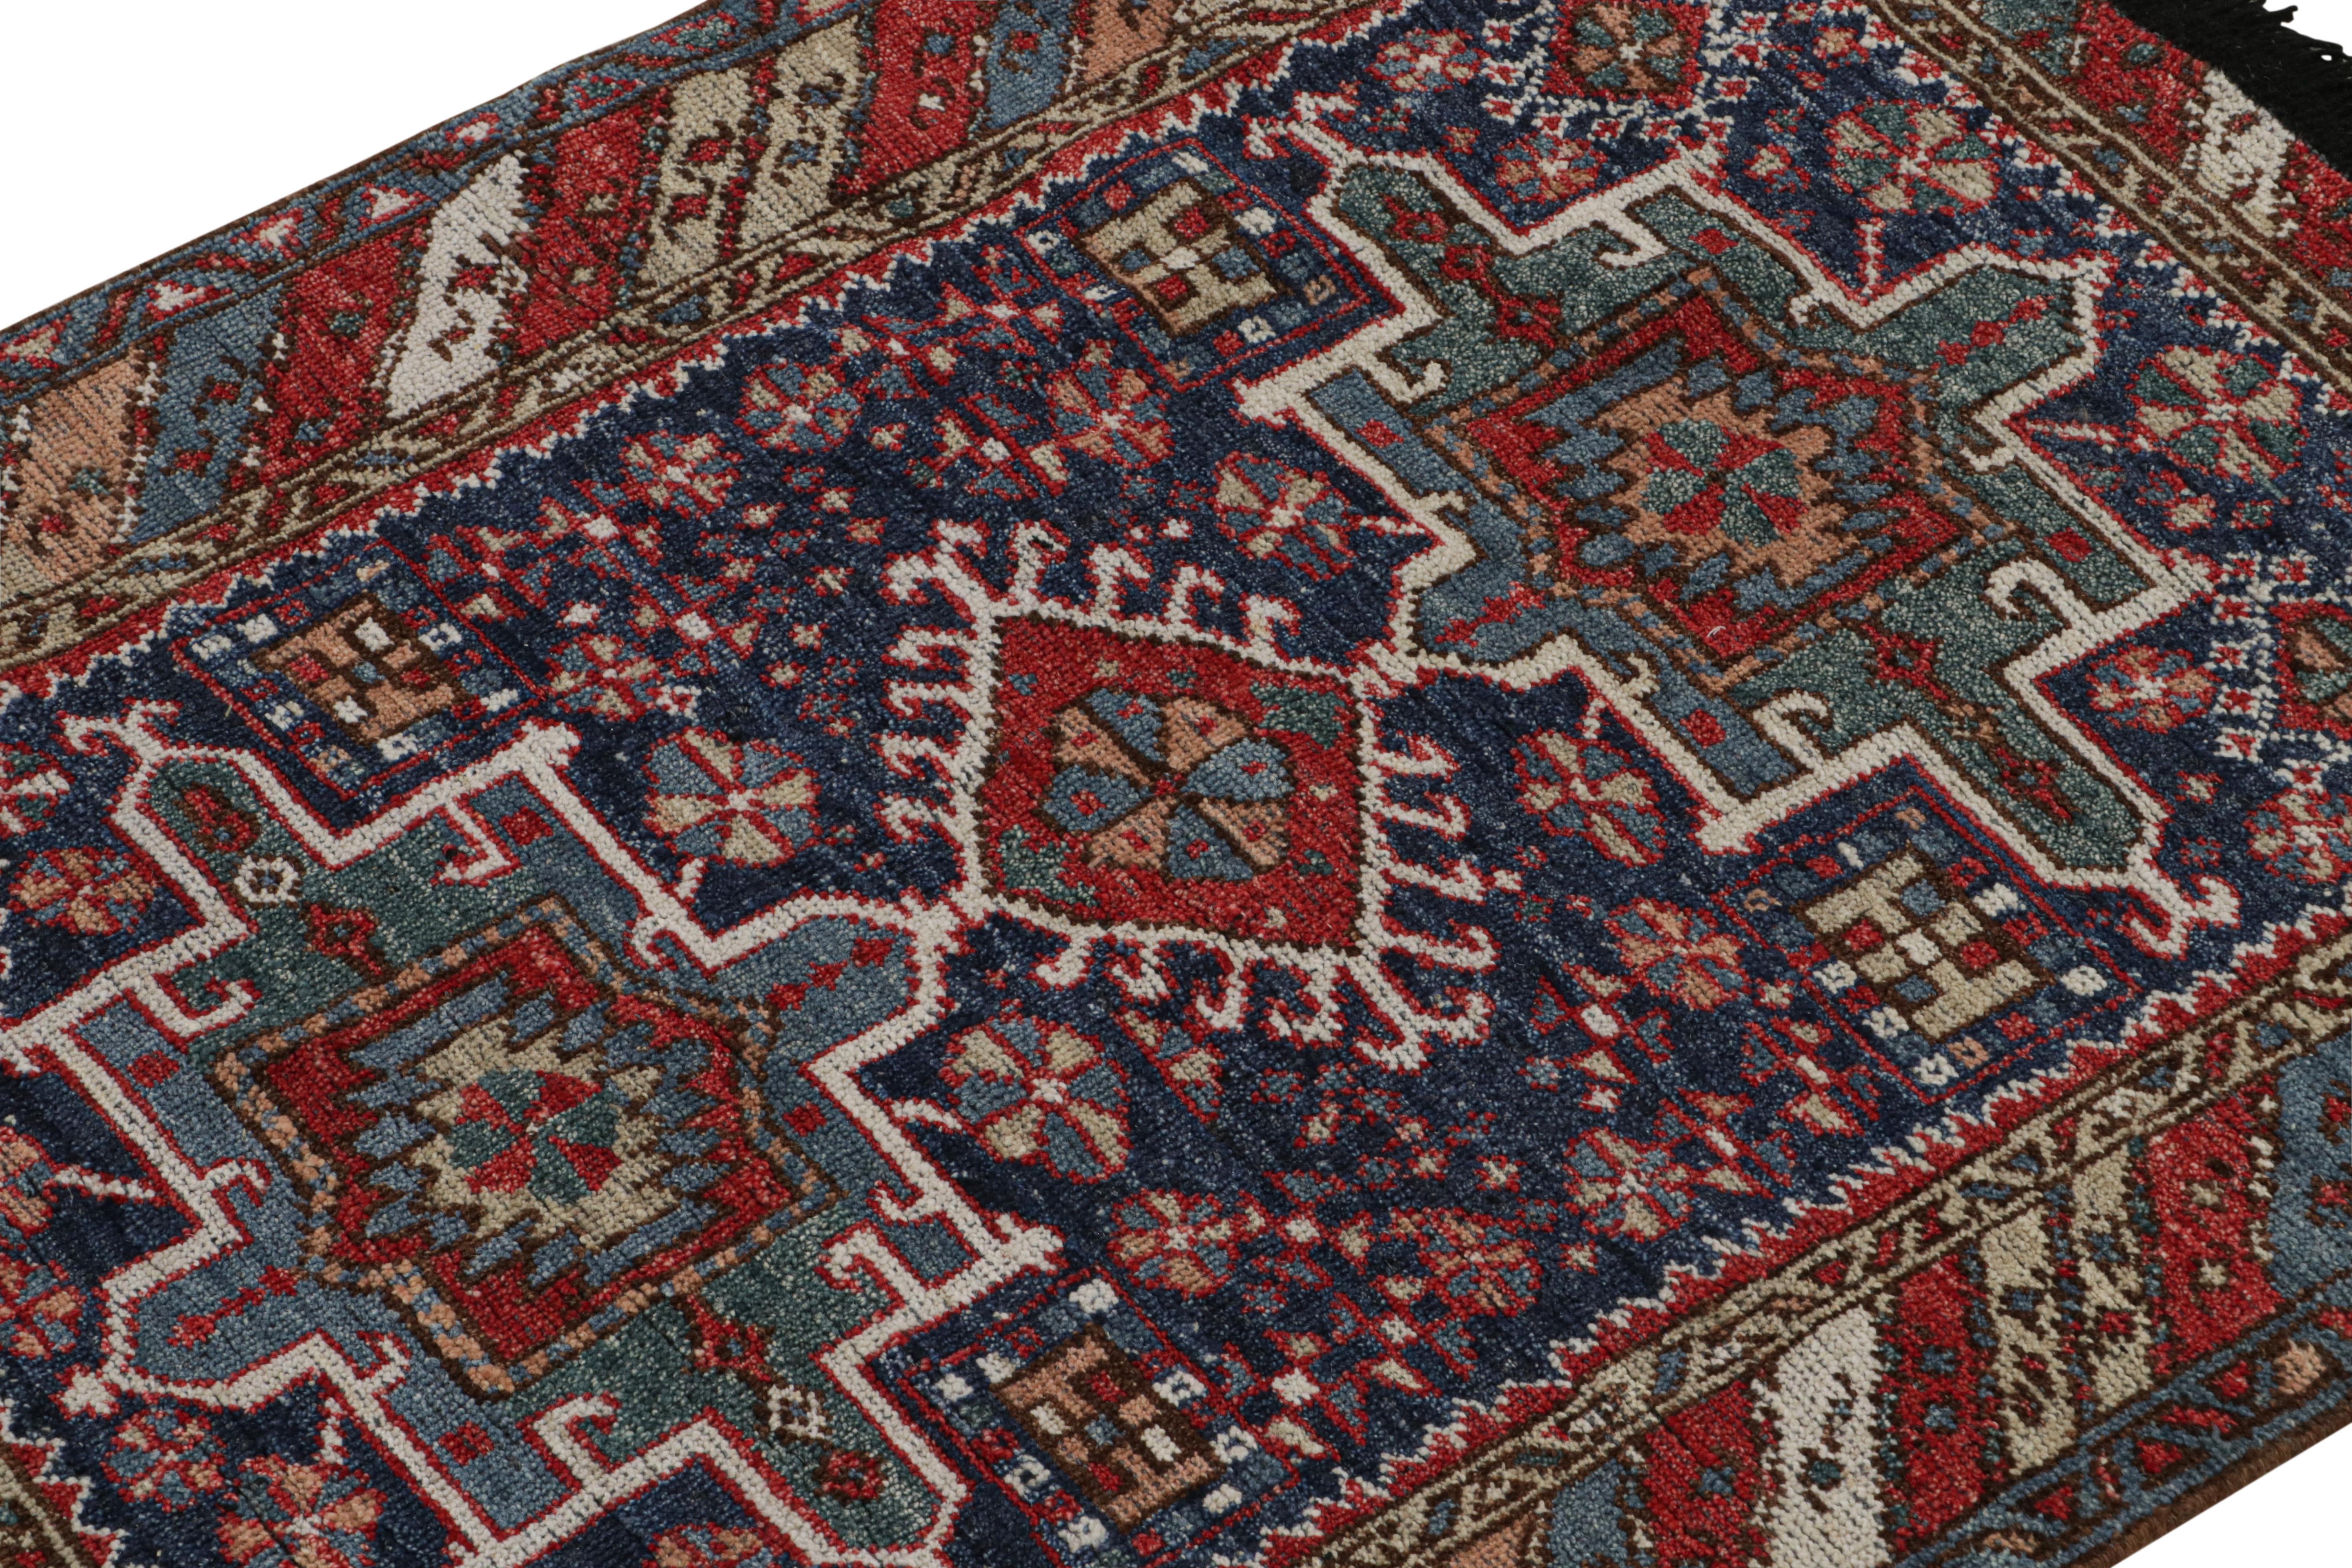 Hand-Knotted Rug & Kilim’s Persian Tribal Style rug in Red & Blue Patterns For Sale